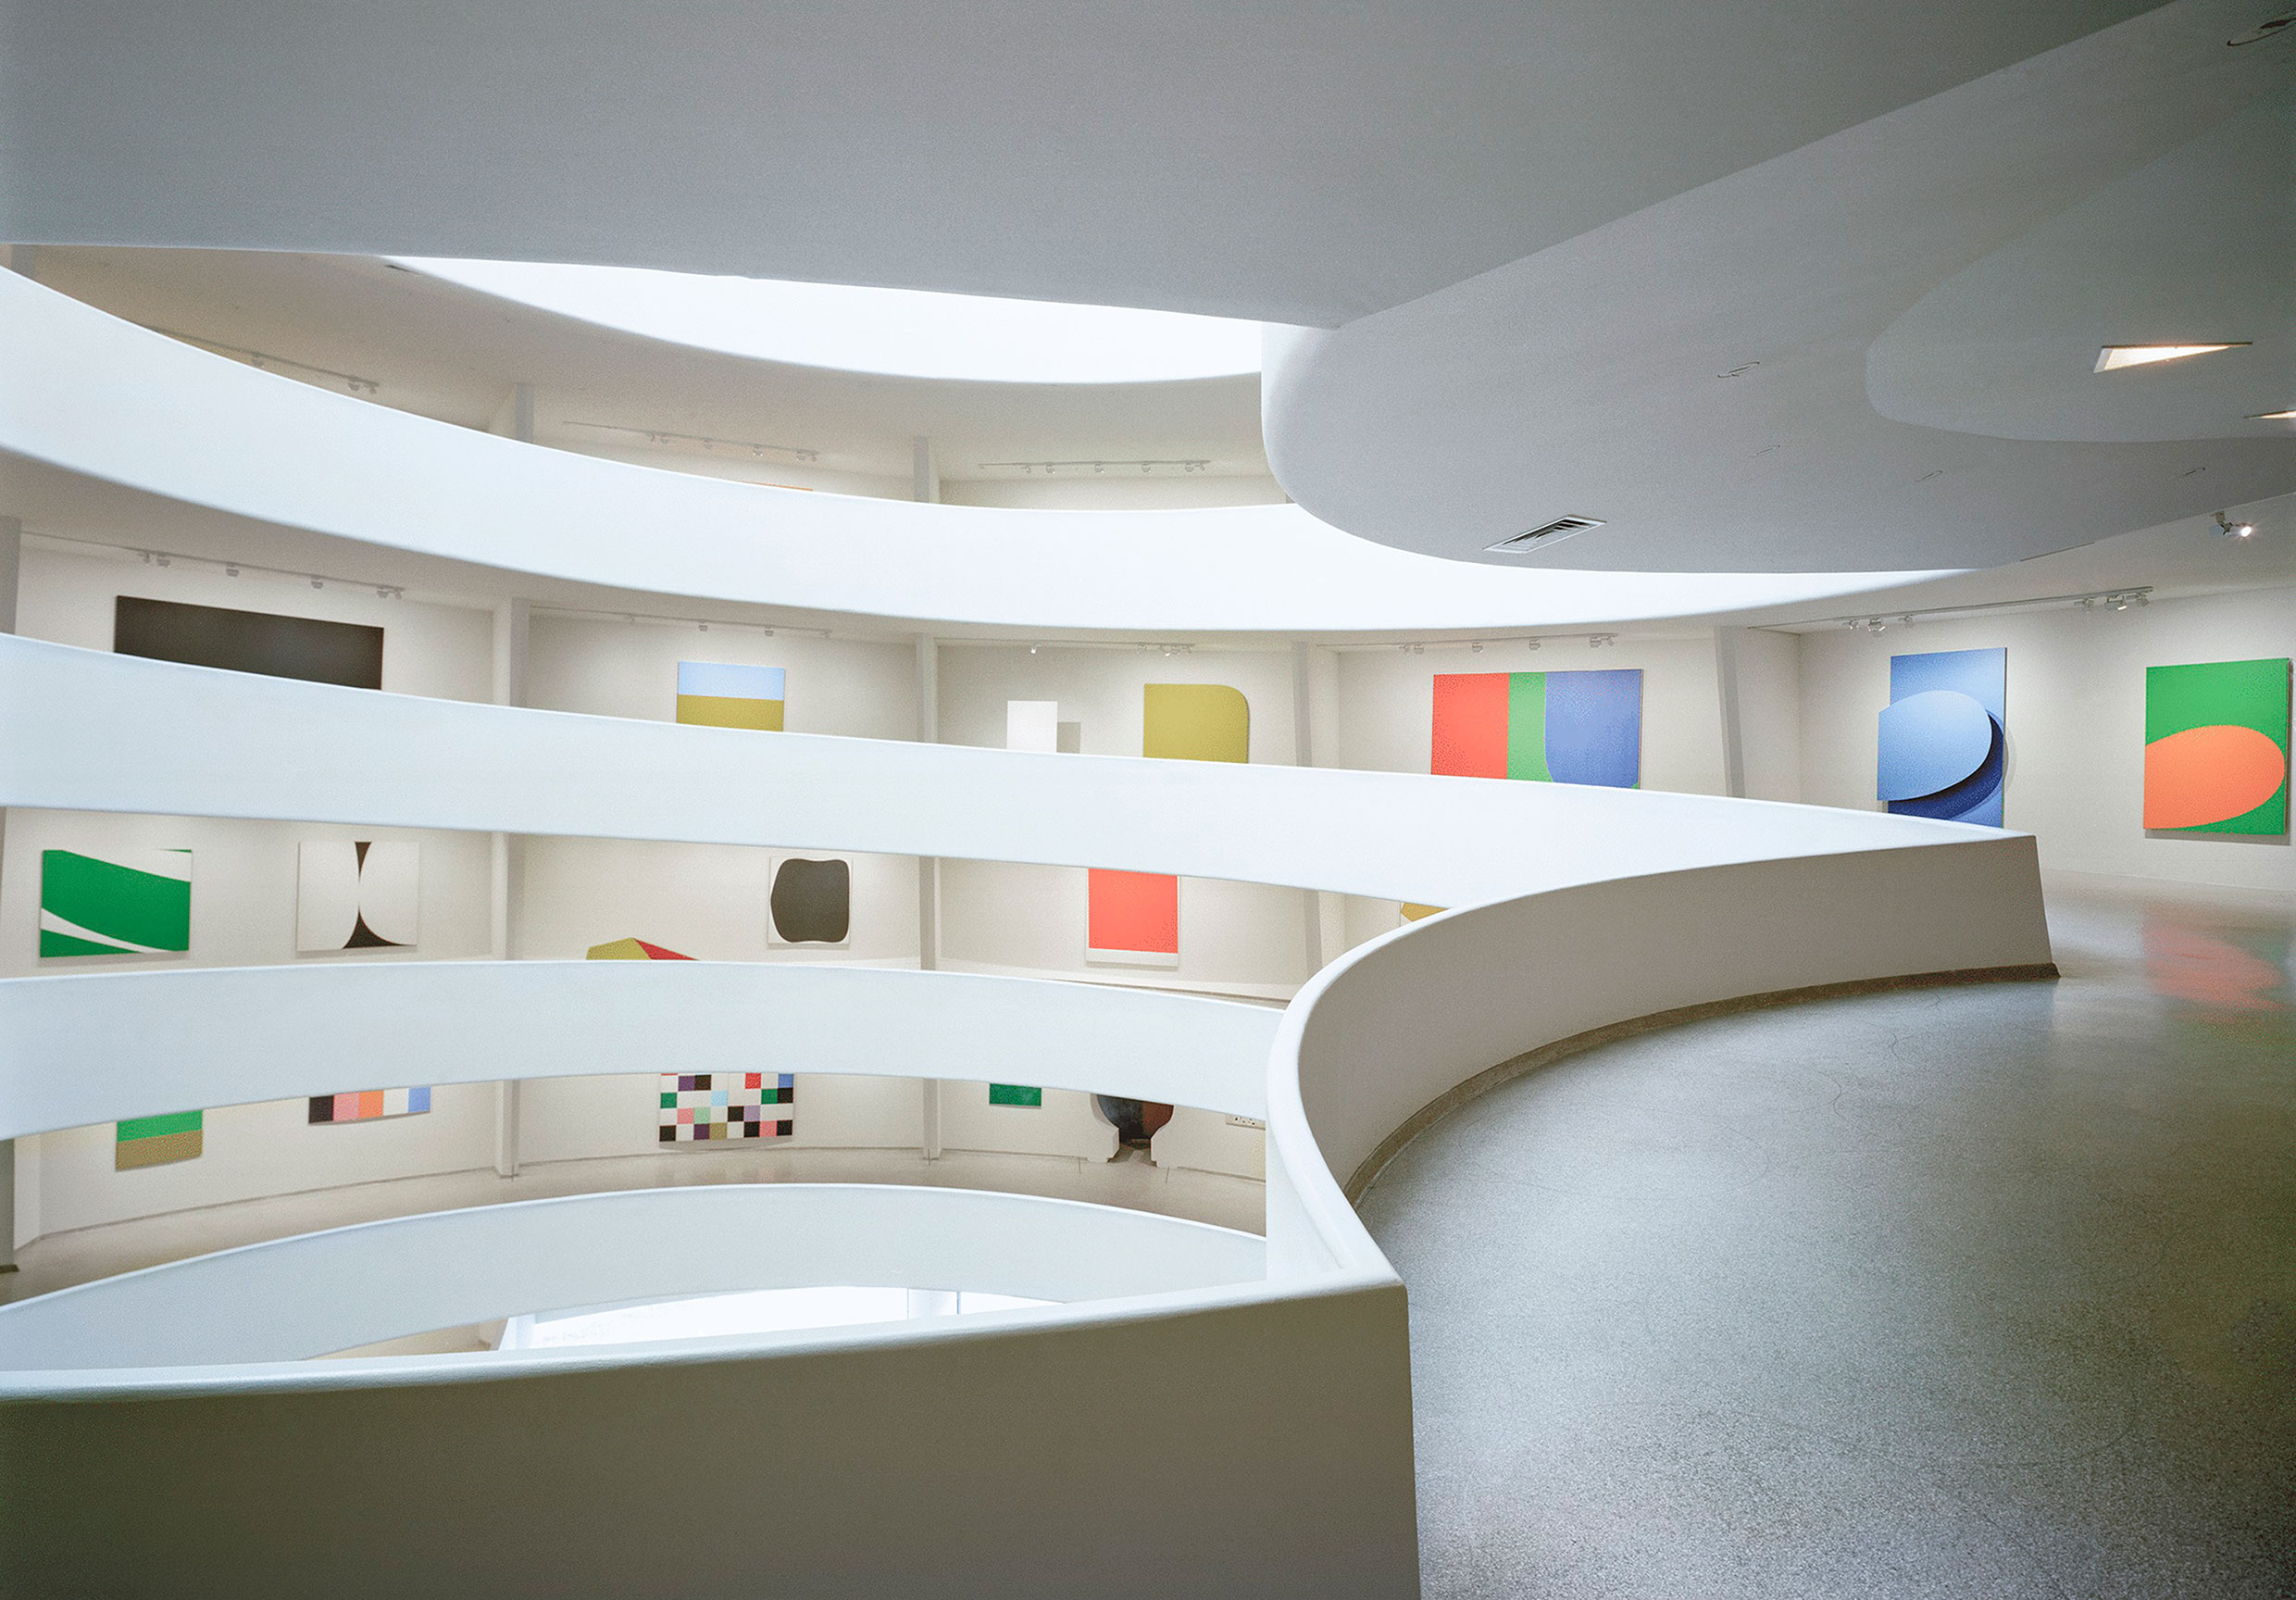 Interesting facts about the Solomon R. Guggenheim Museum | Just Fun Facts